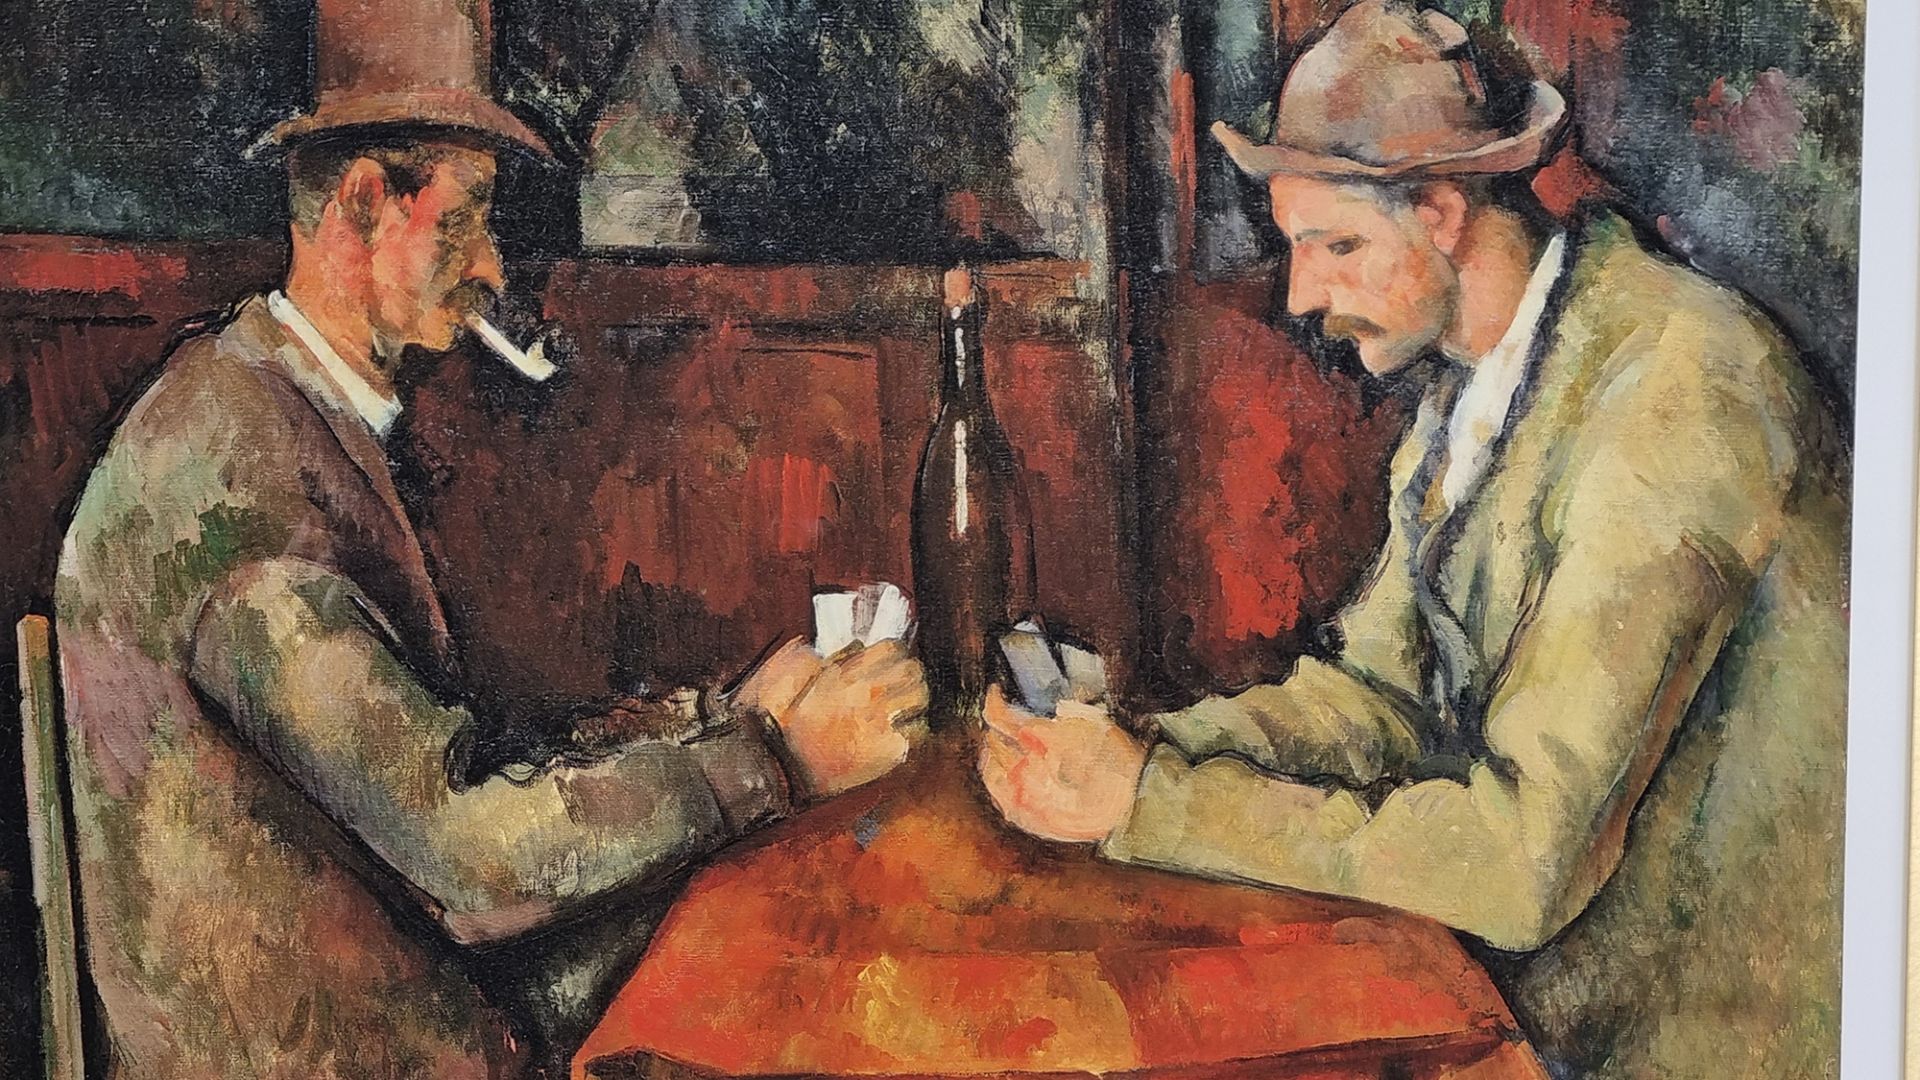 Limited Edition ""The Card Players"" by Paul Cezanne - Image 10 of 10